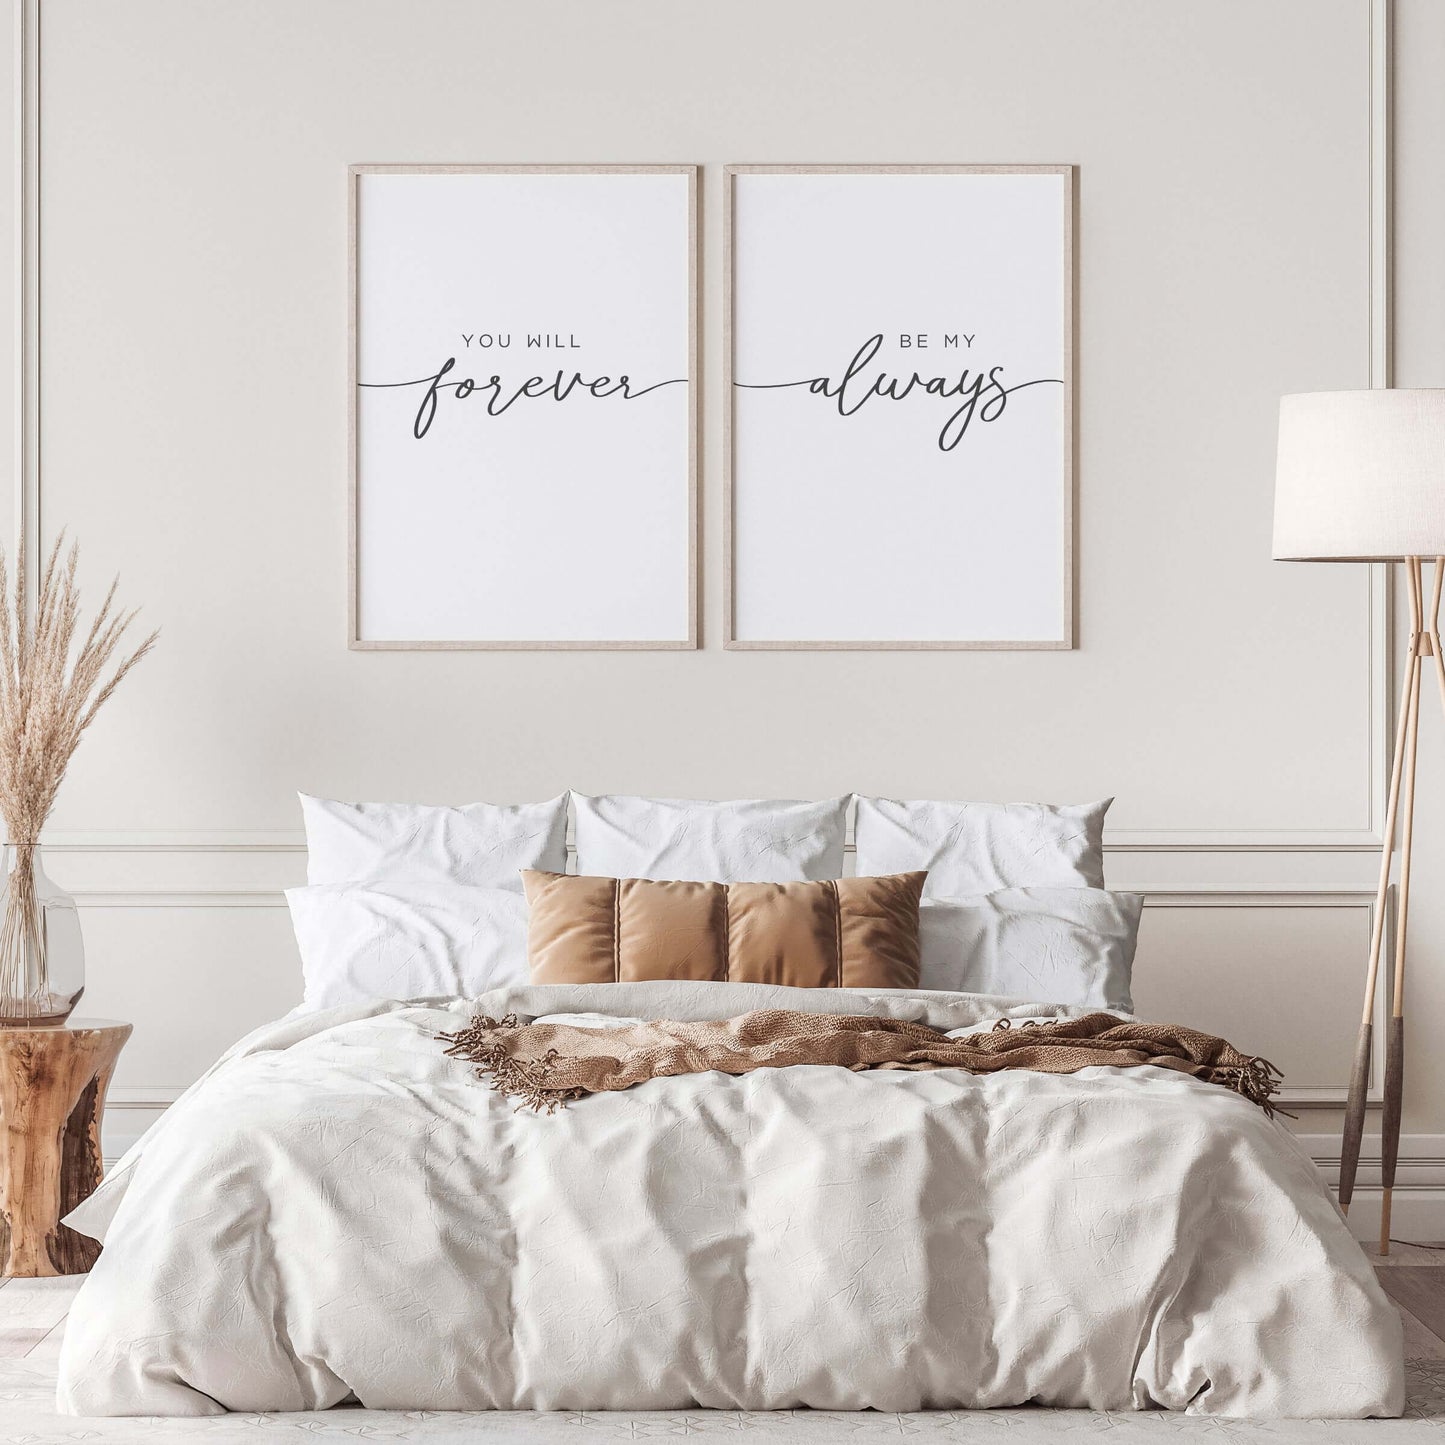 You will forever be my always bedroom art set of 2